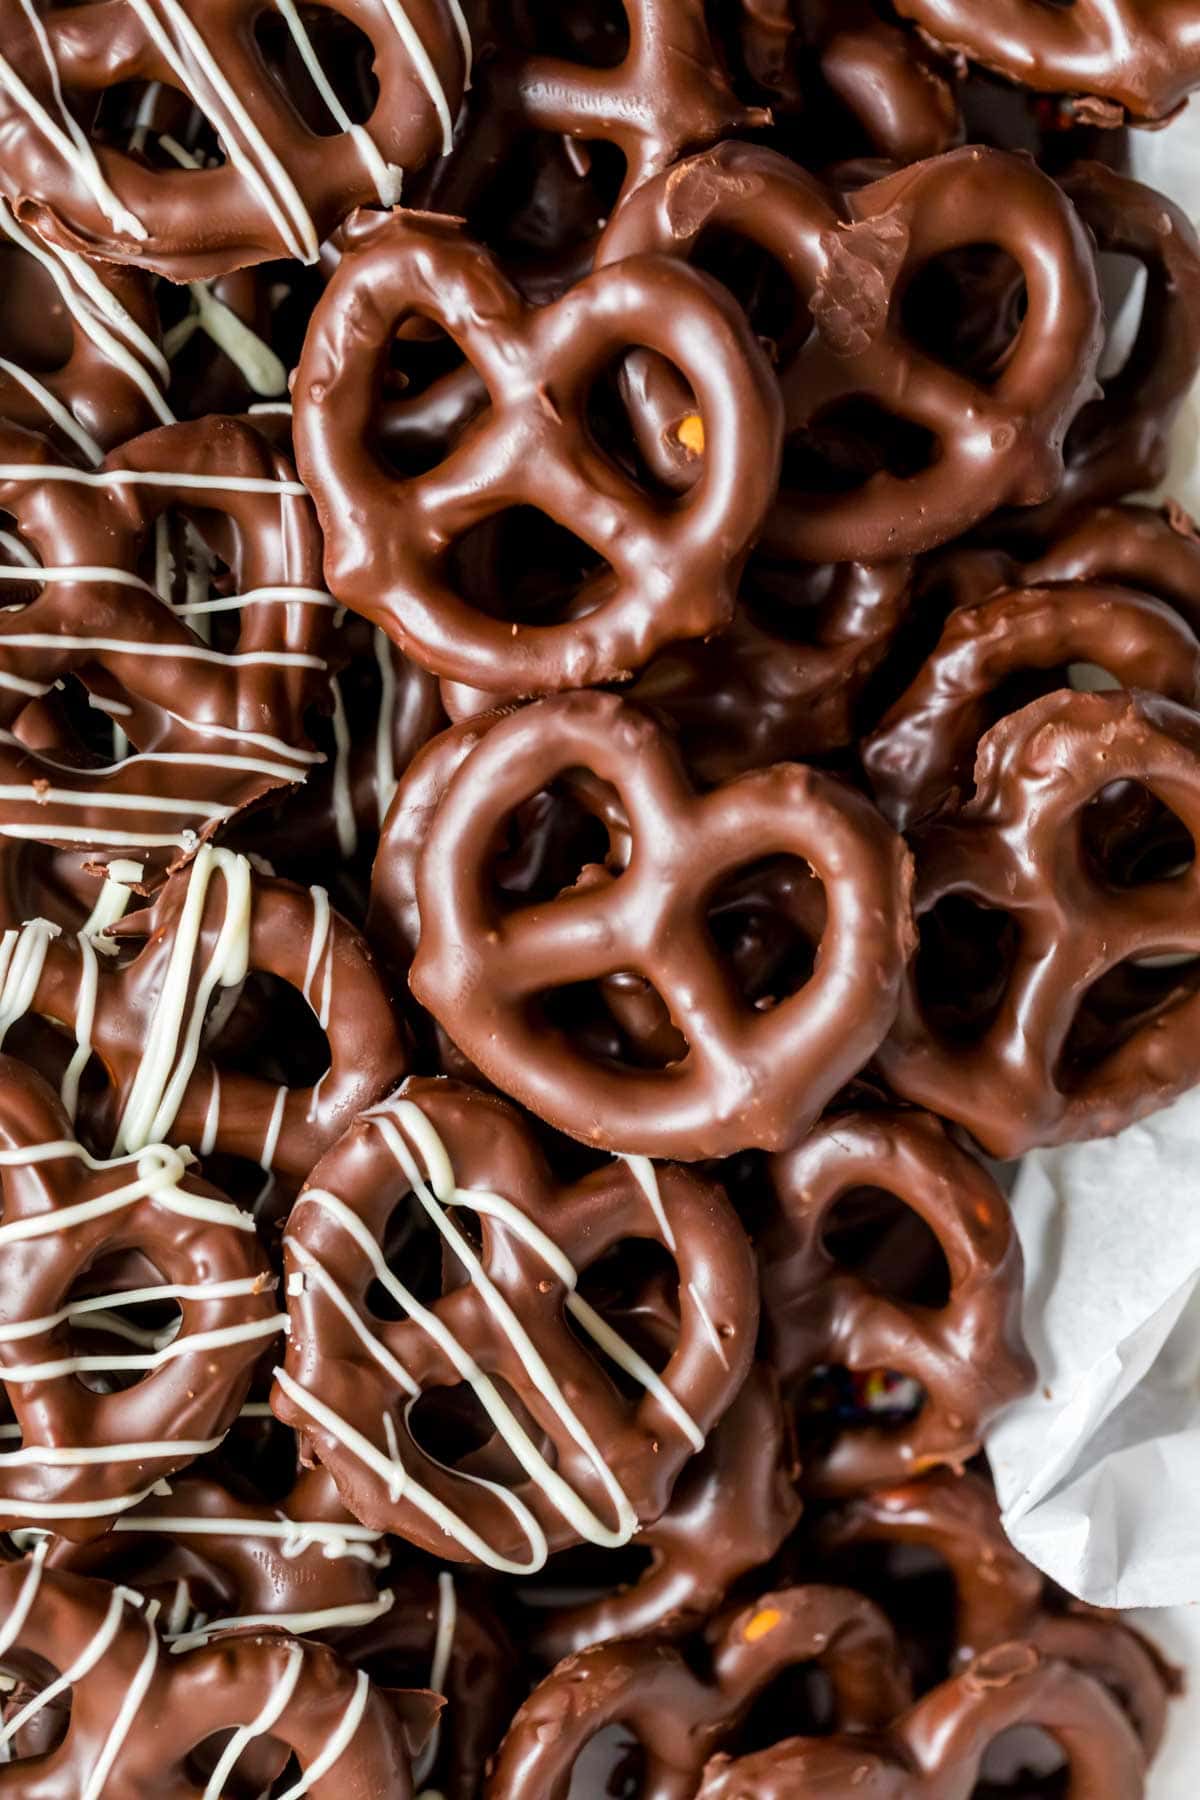 Close up view of chocolate dipped pretzels, some drizzled with white chocolate.